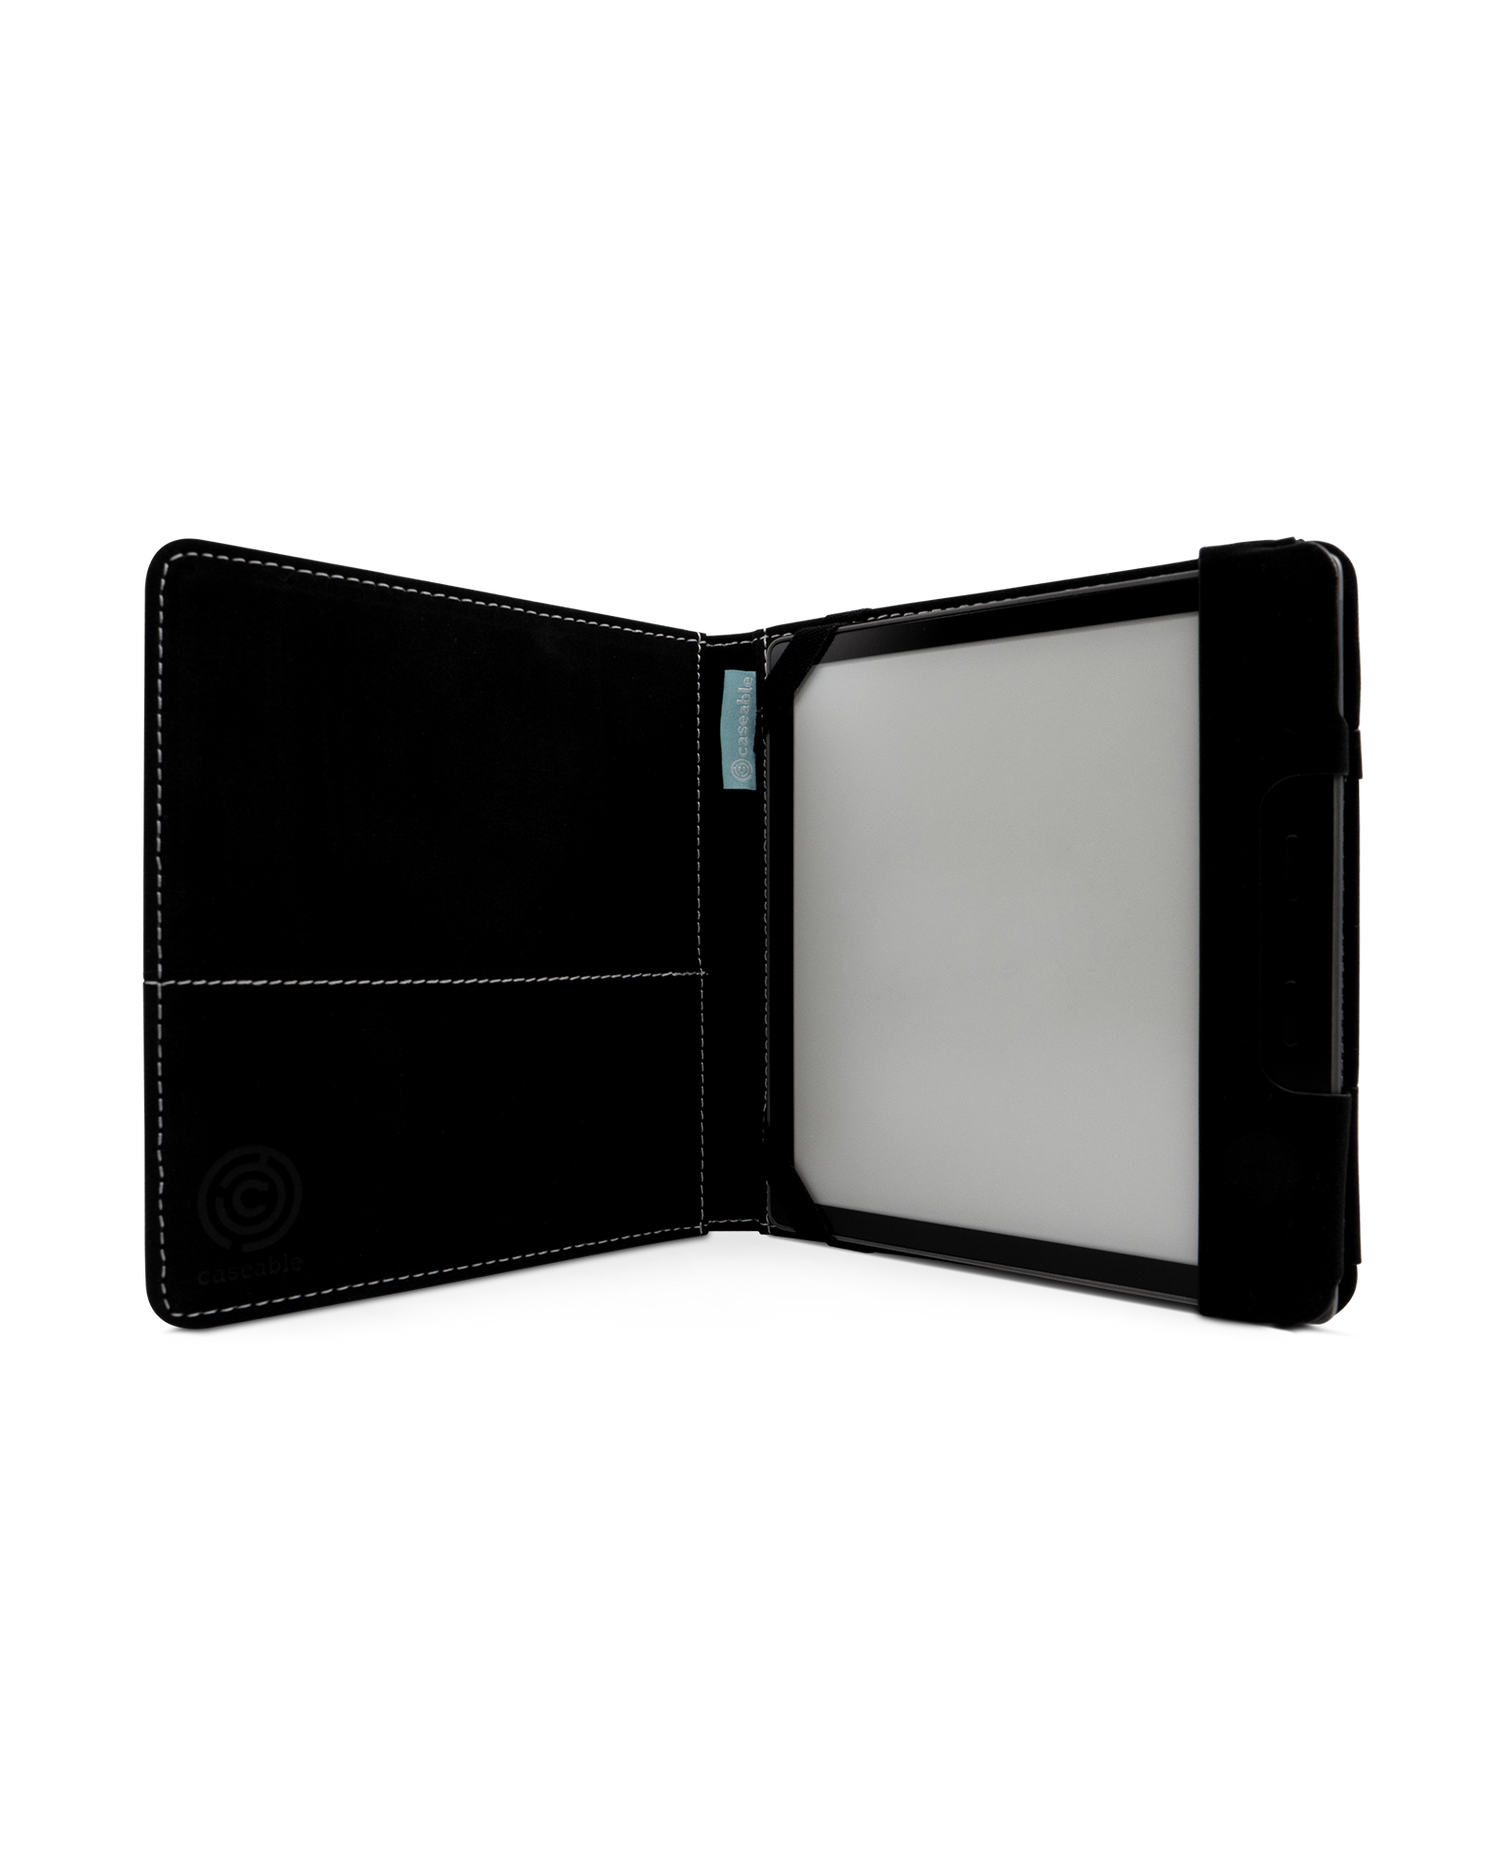 Have A Day eReader Case for tolino vision 6: Opened interior view